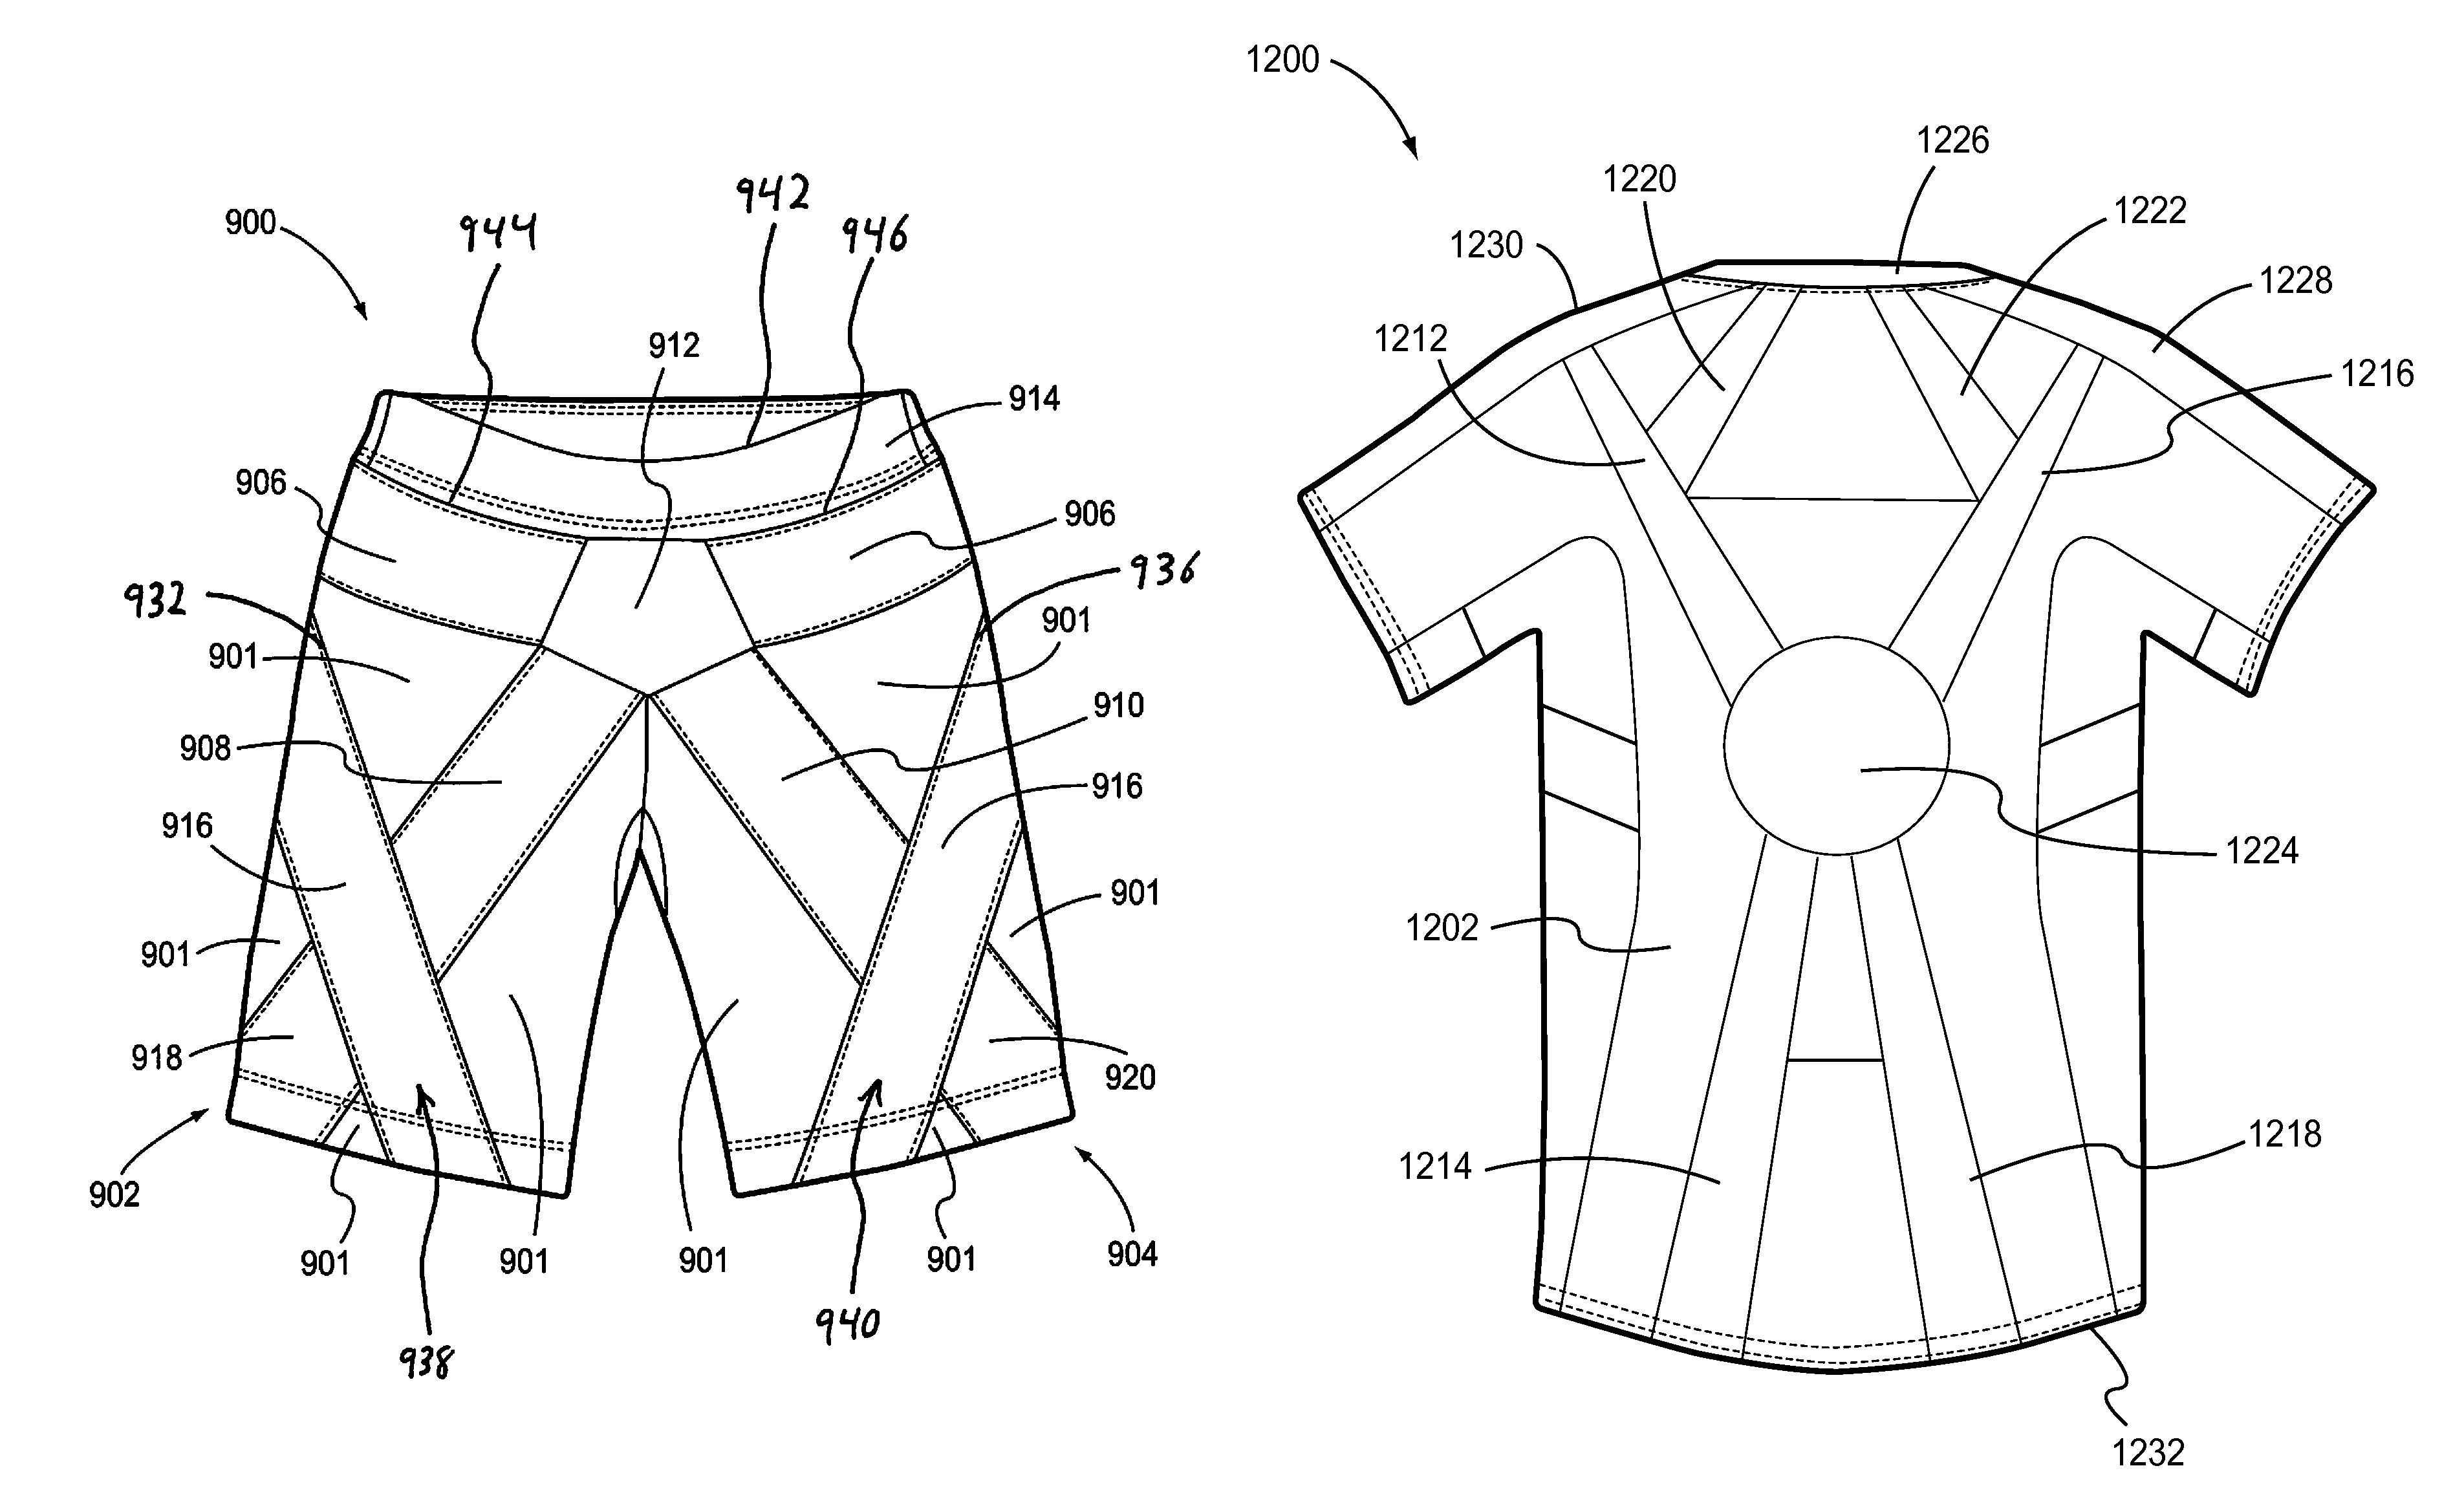 Shirts and shorts having elastic and non-stretch portions and bands to provide hip and posture support